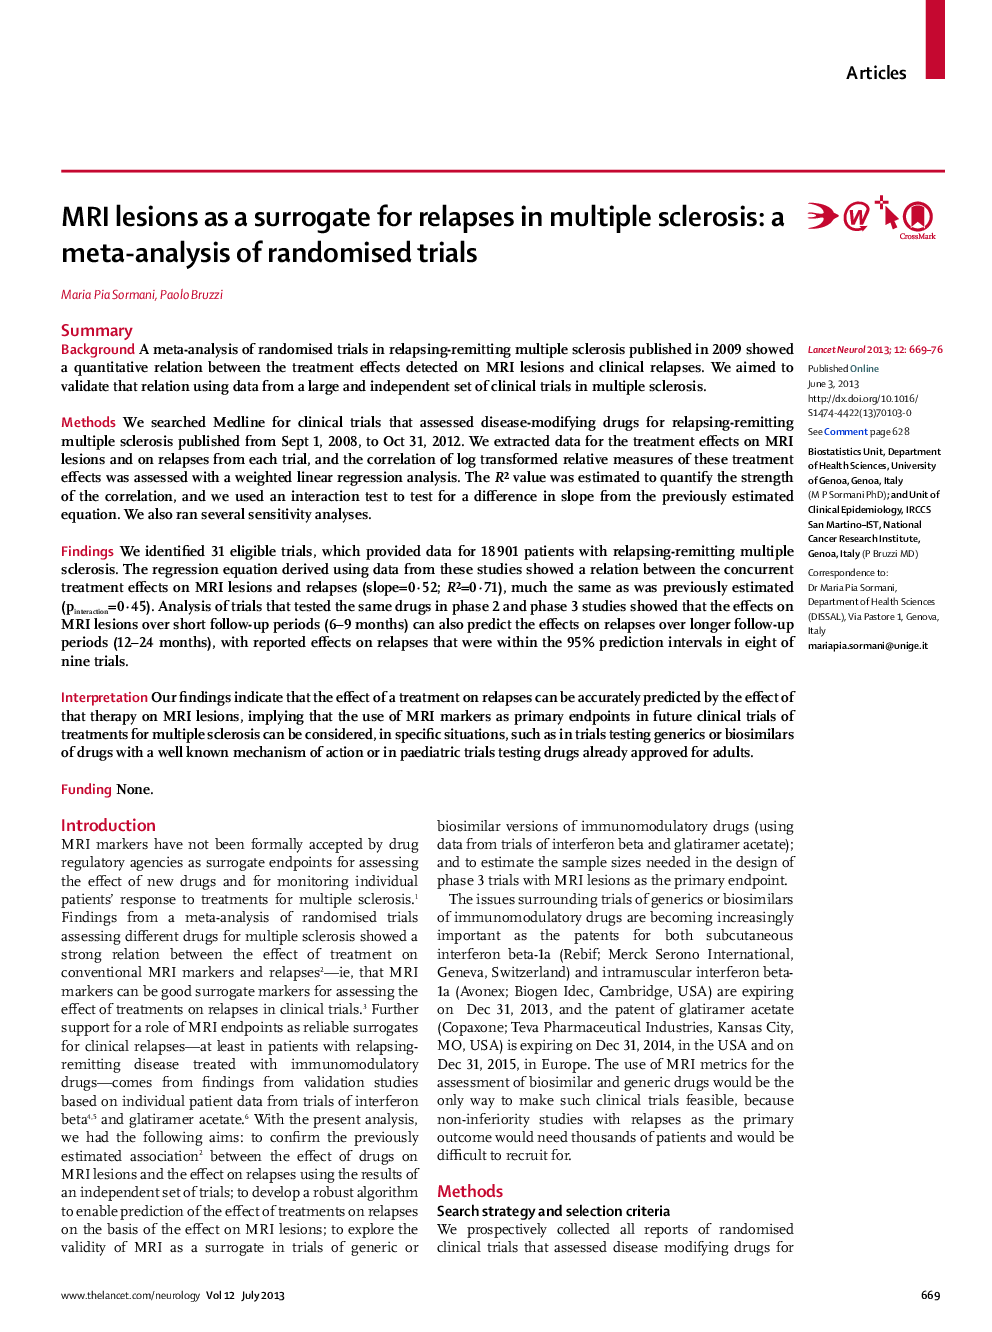 MRI lesions as a surrogate for relapses in multiple sclerosis: a meta-analysis of randomised trials